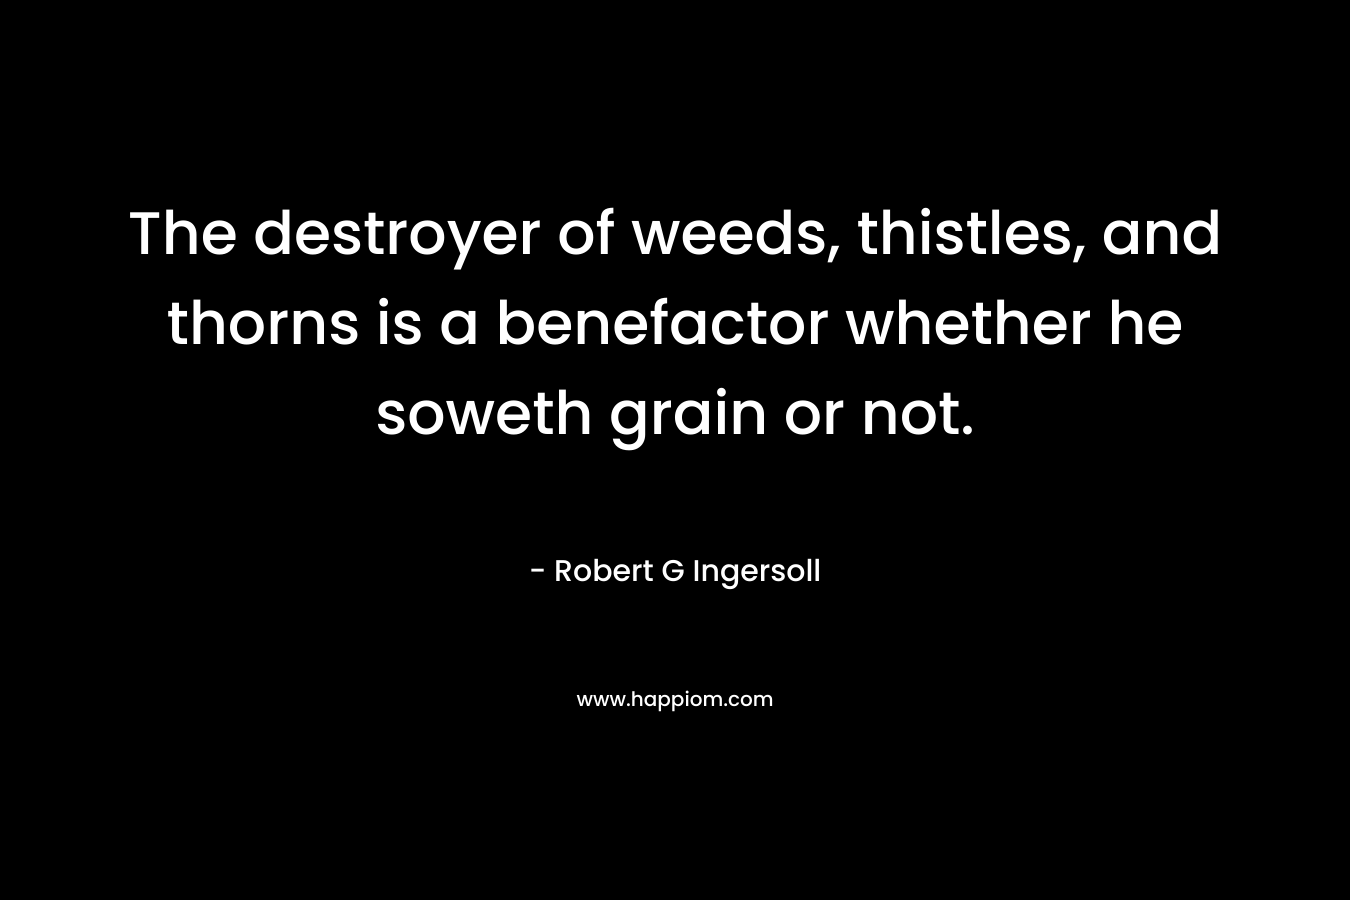 The destroyer of weeds, thistles, and thorns is a benefactor whether he soweth grain or not.